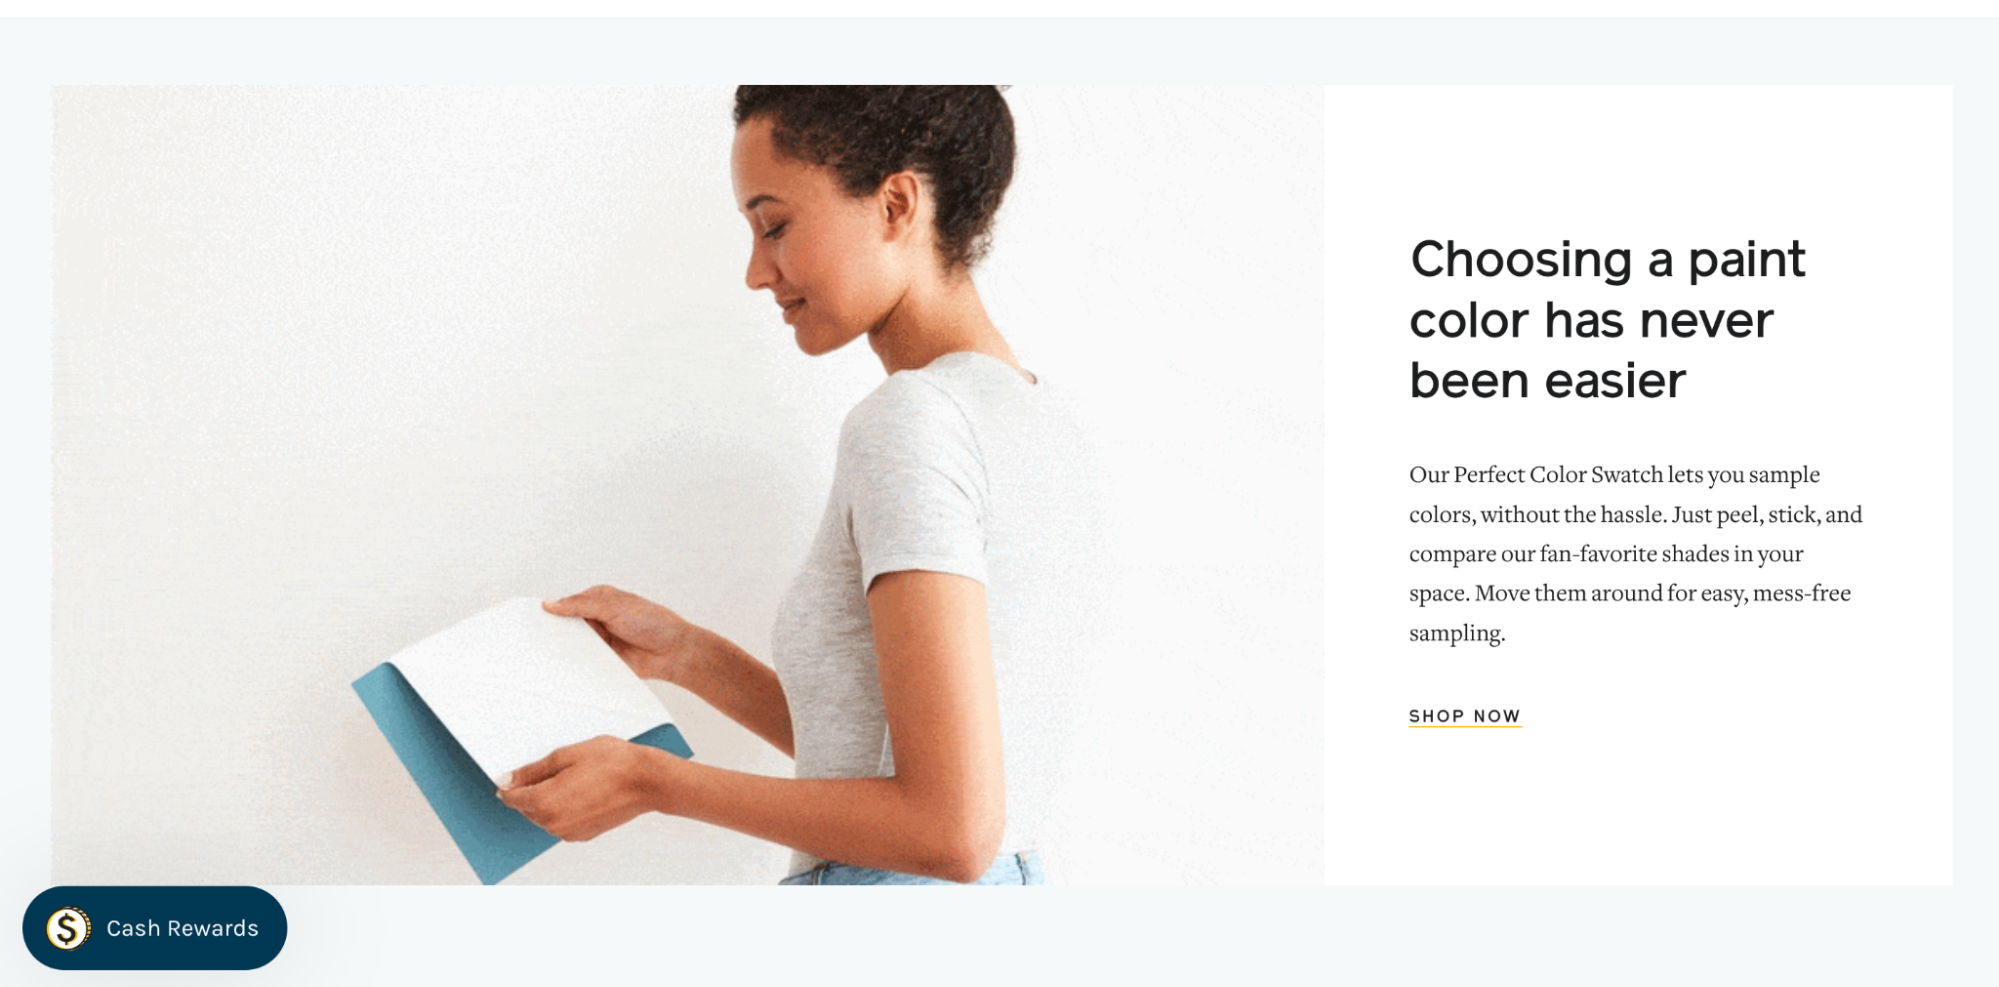 Clare ecommerce experience 2 direct-to-consumer brands